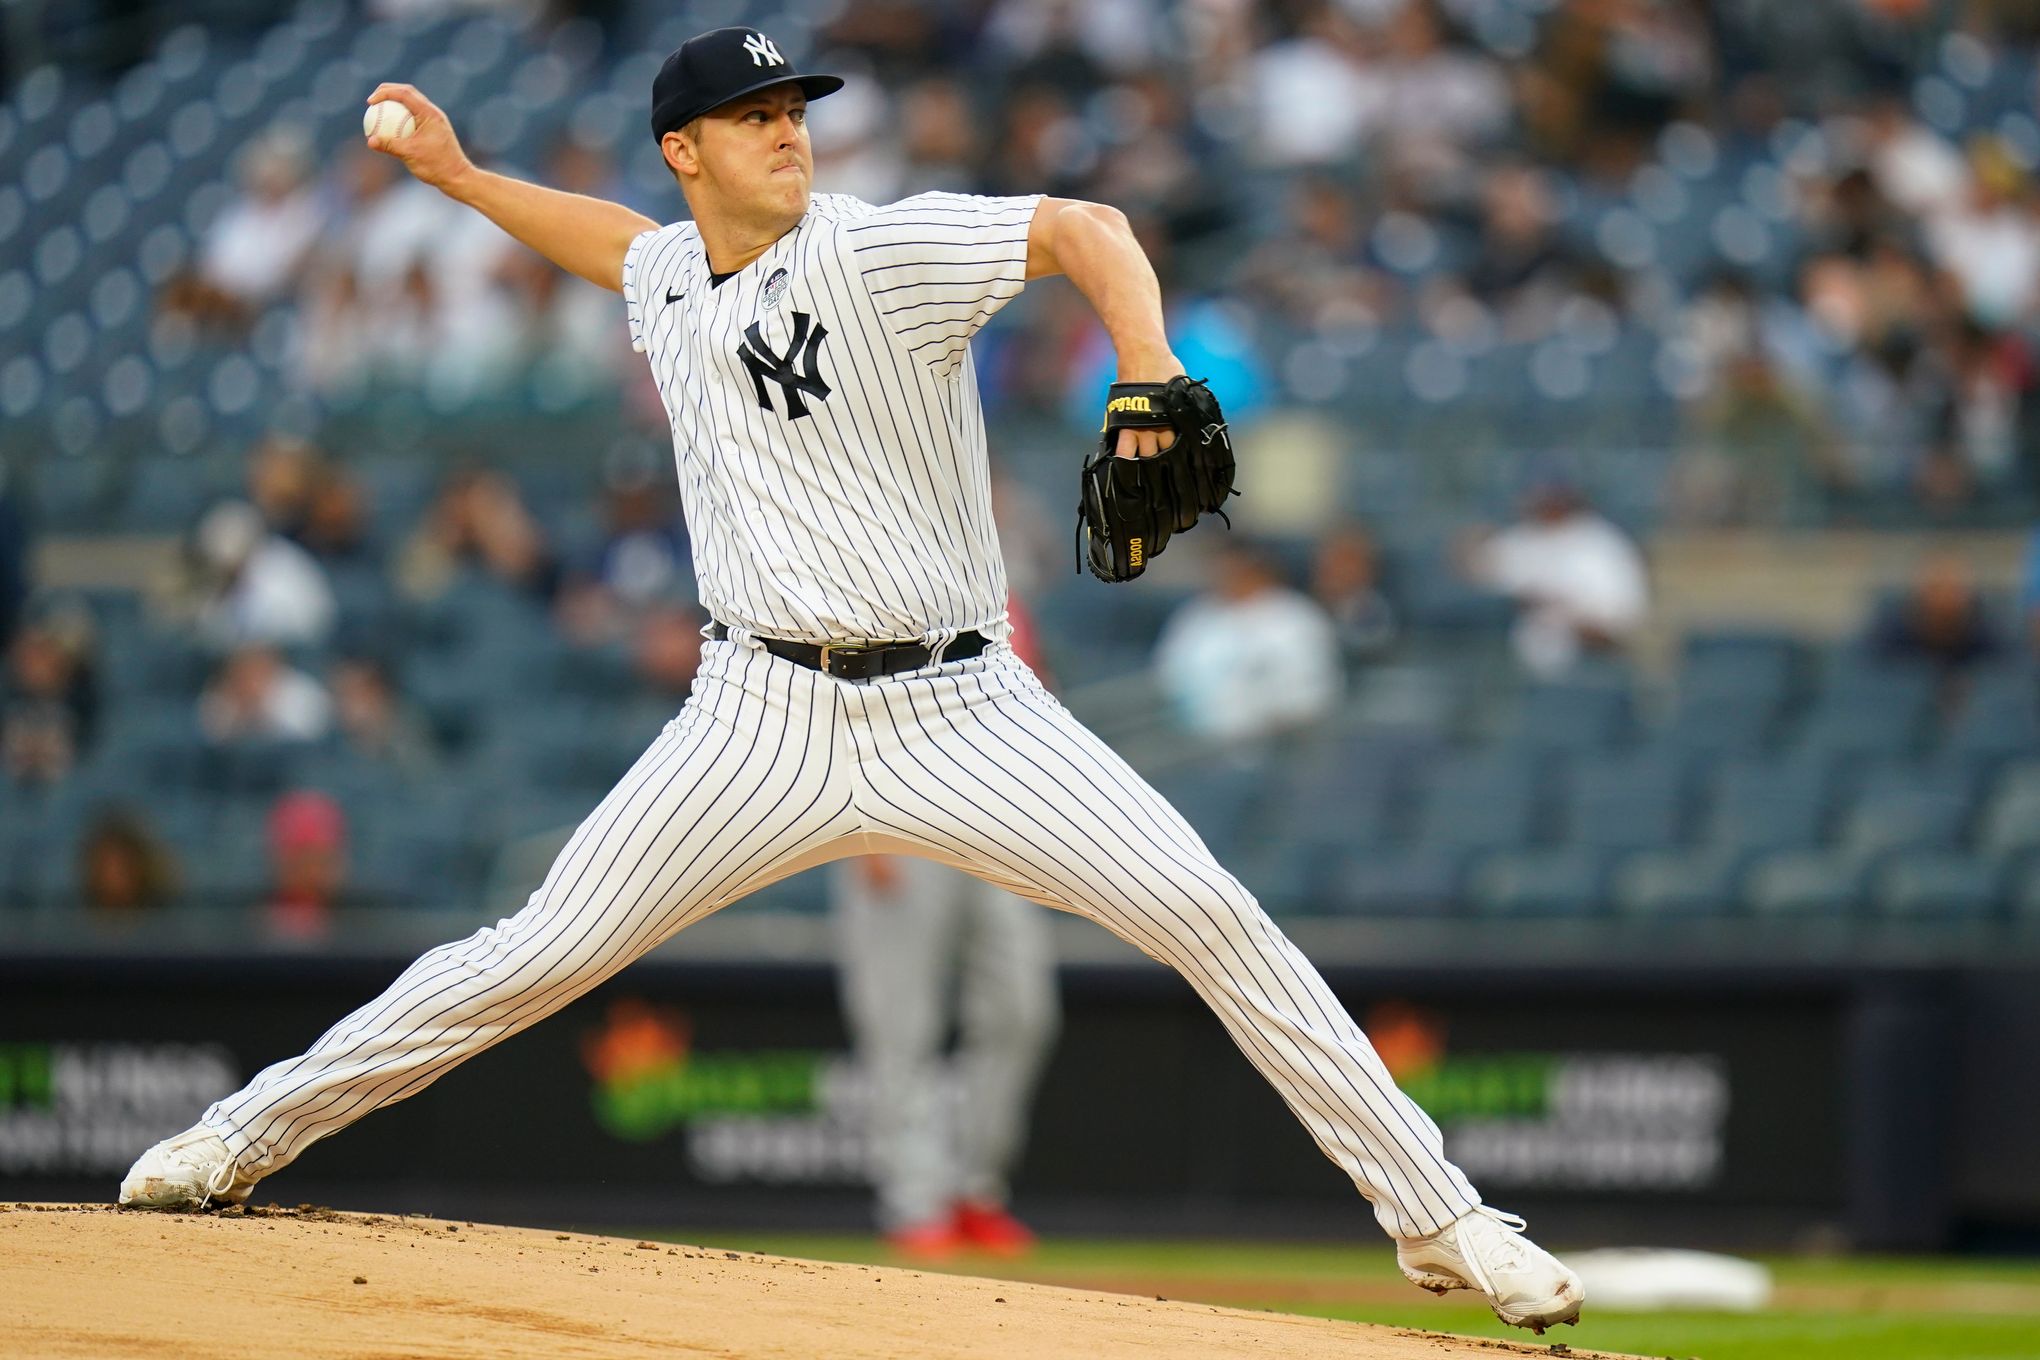 Yankees' Taillon loses perfecto in 8th on double off glove